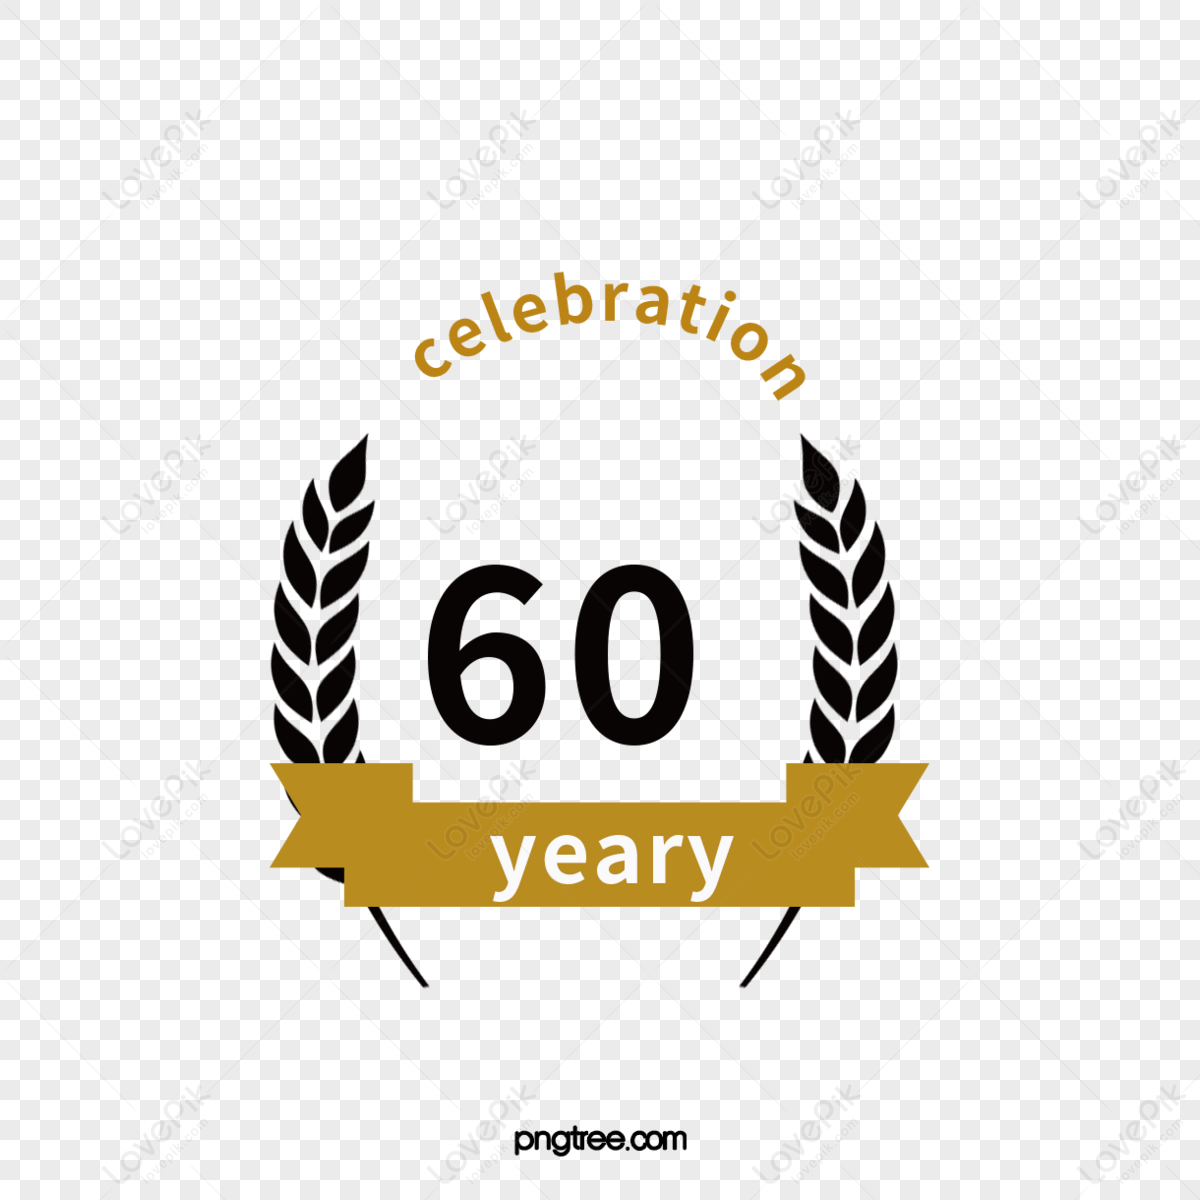 50th Anniversary Vector Art, Icons, and Graphics for Free Download